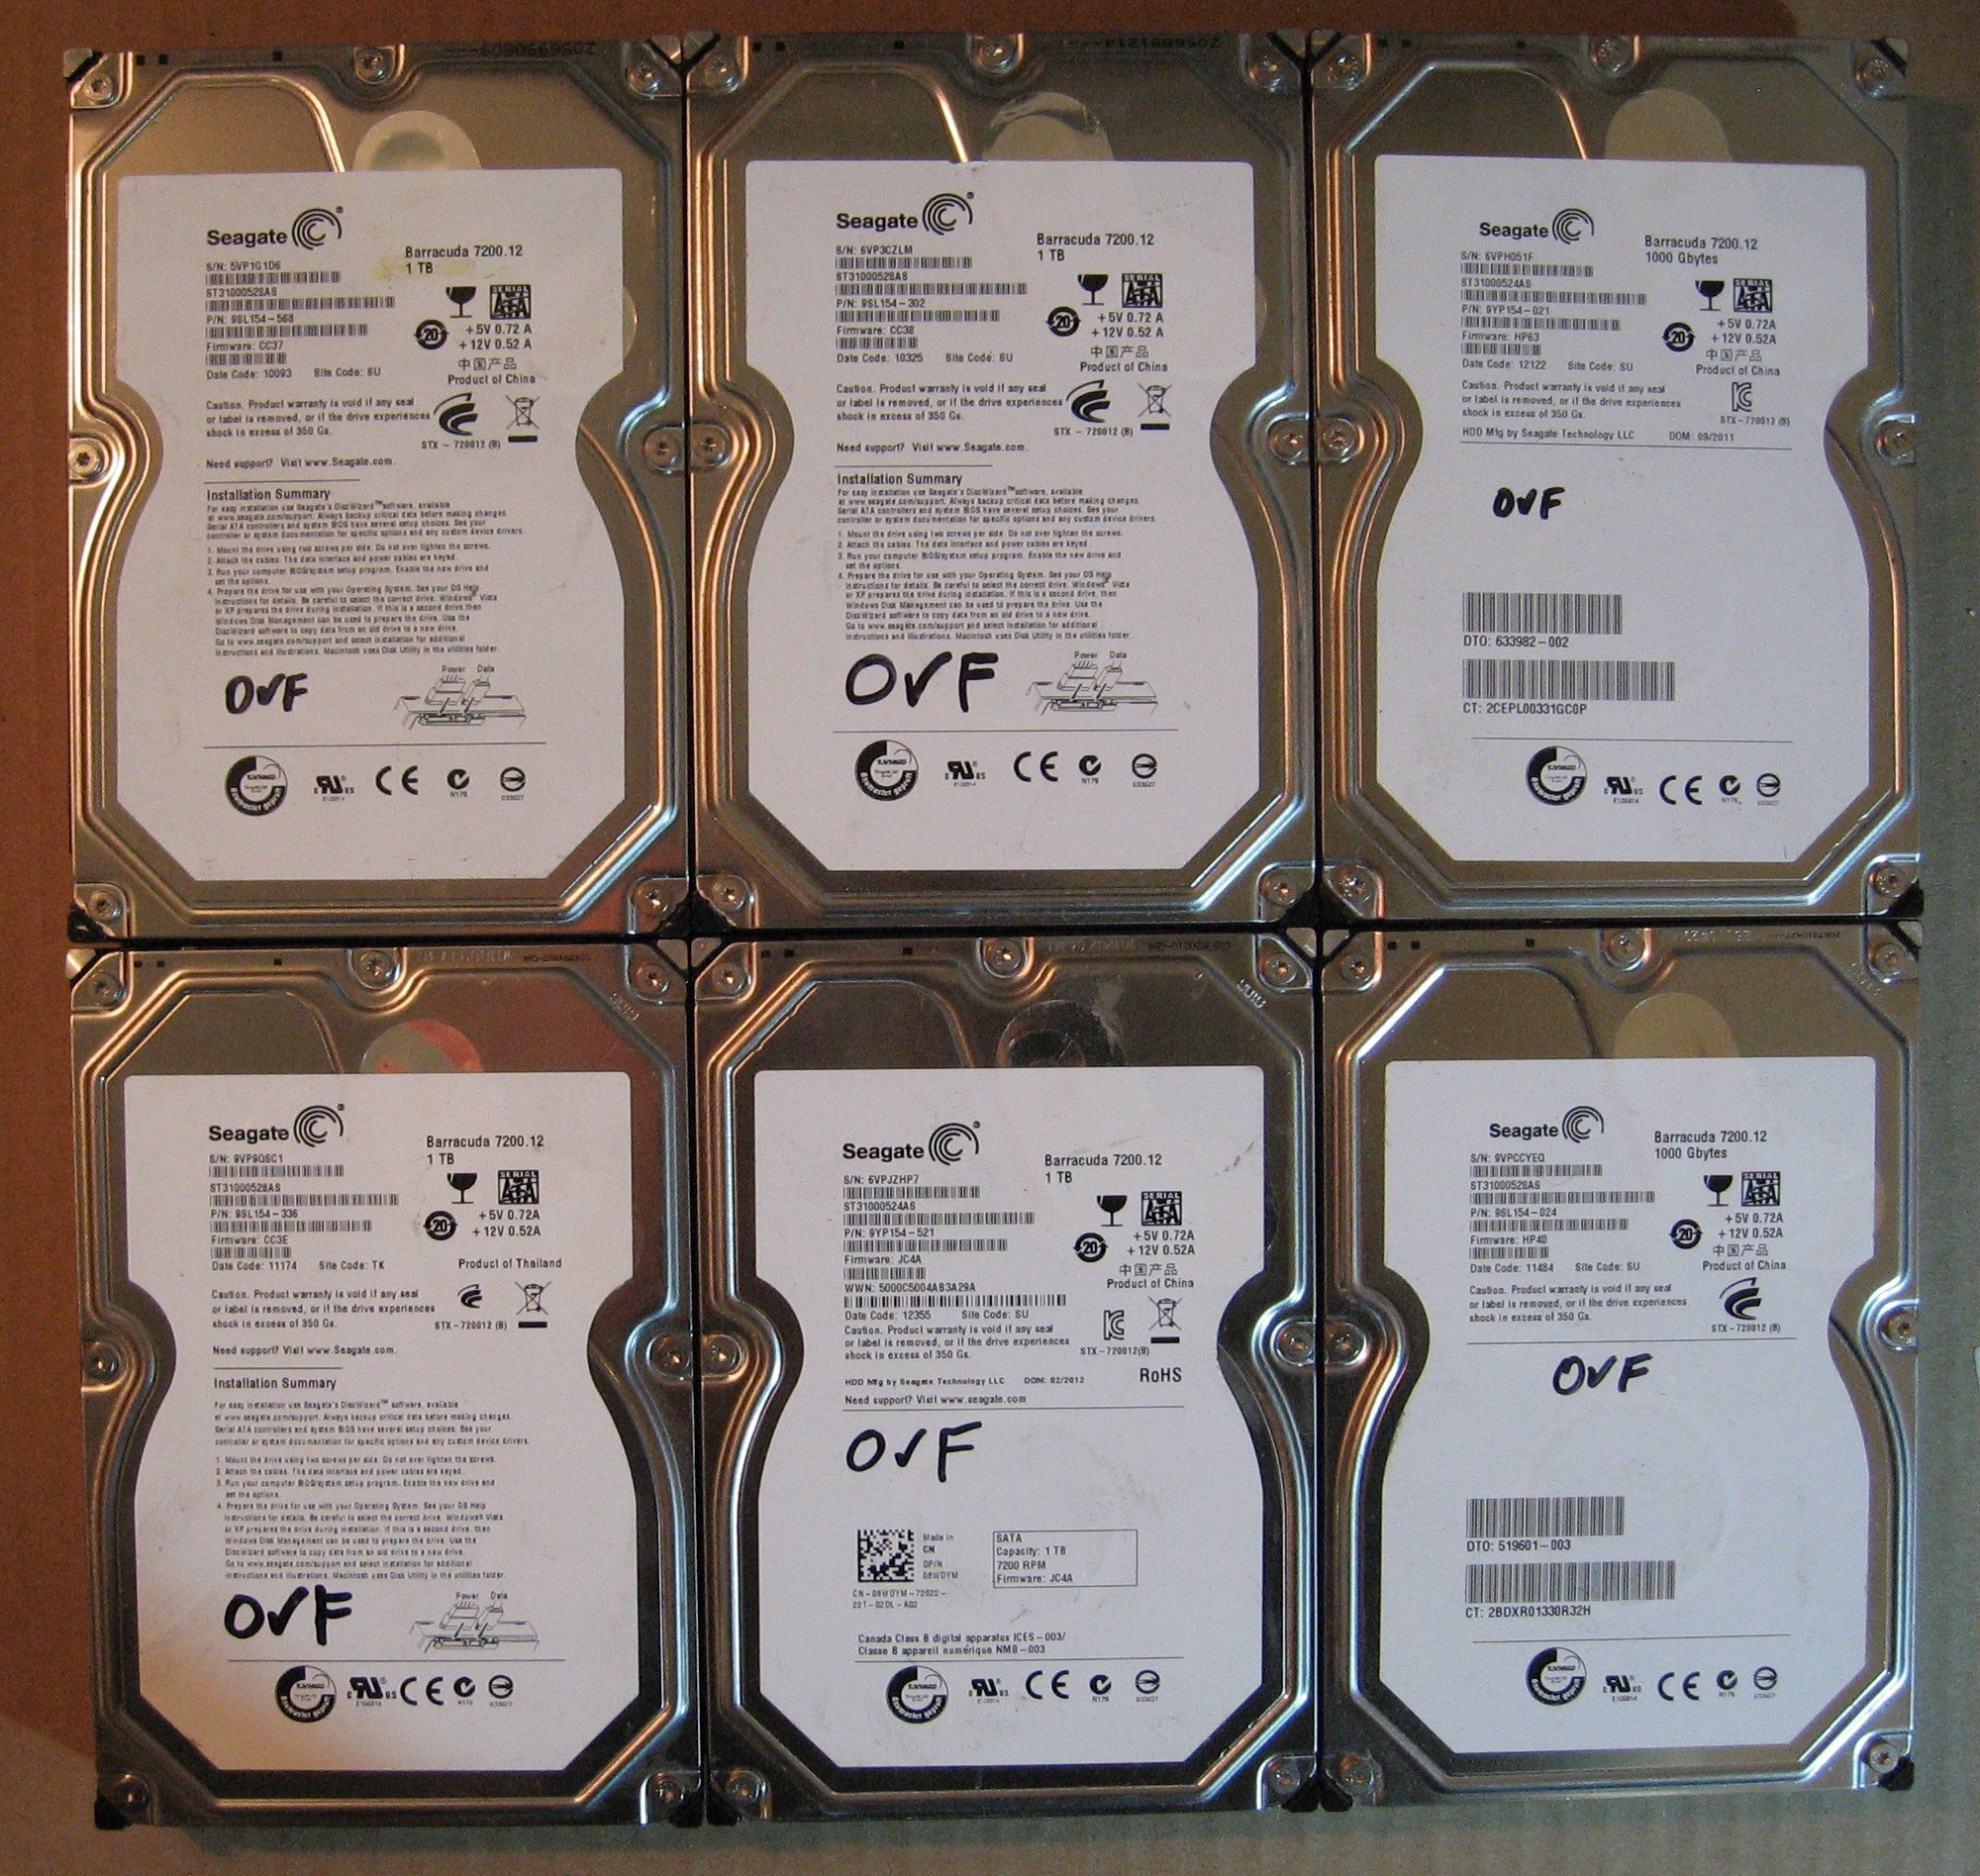 1TB HDD Lot of 6 Seagate 0575